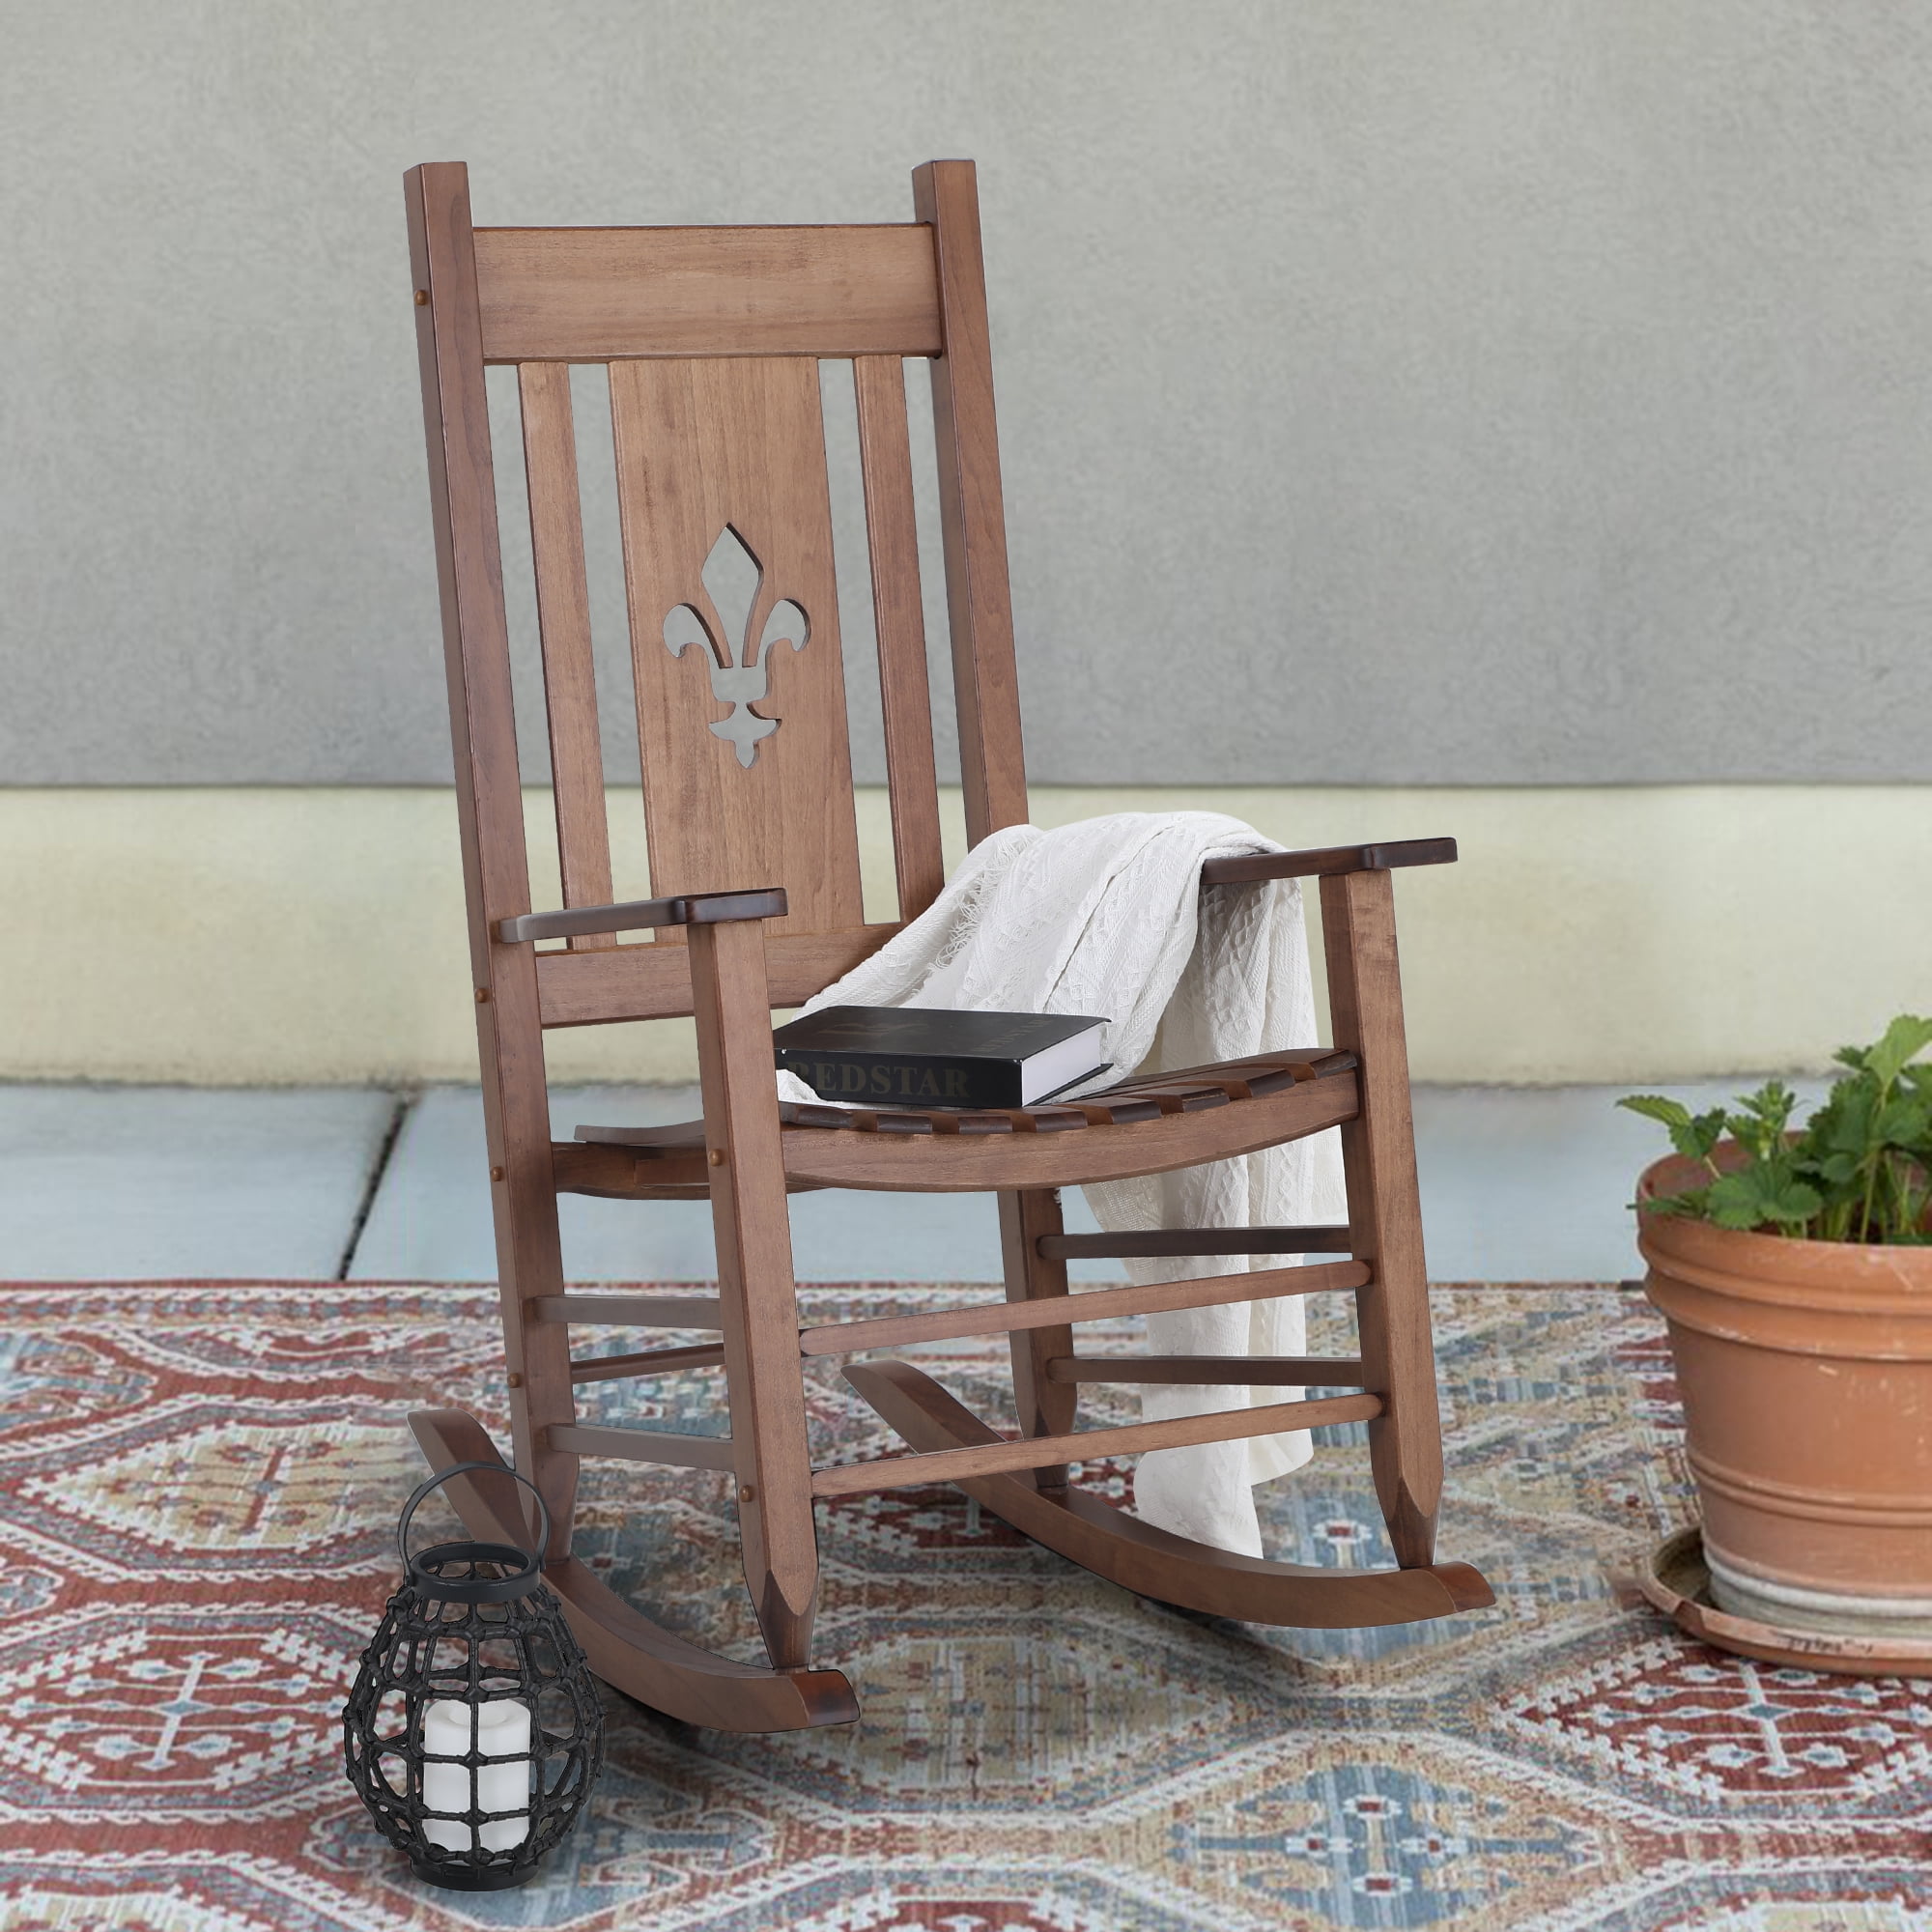 Details about   Porch Wood Rocking Chair Outdoor Indoor Patio Wooden Comfort Multiple Color Yard